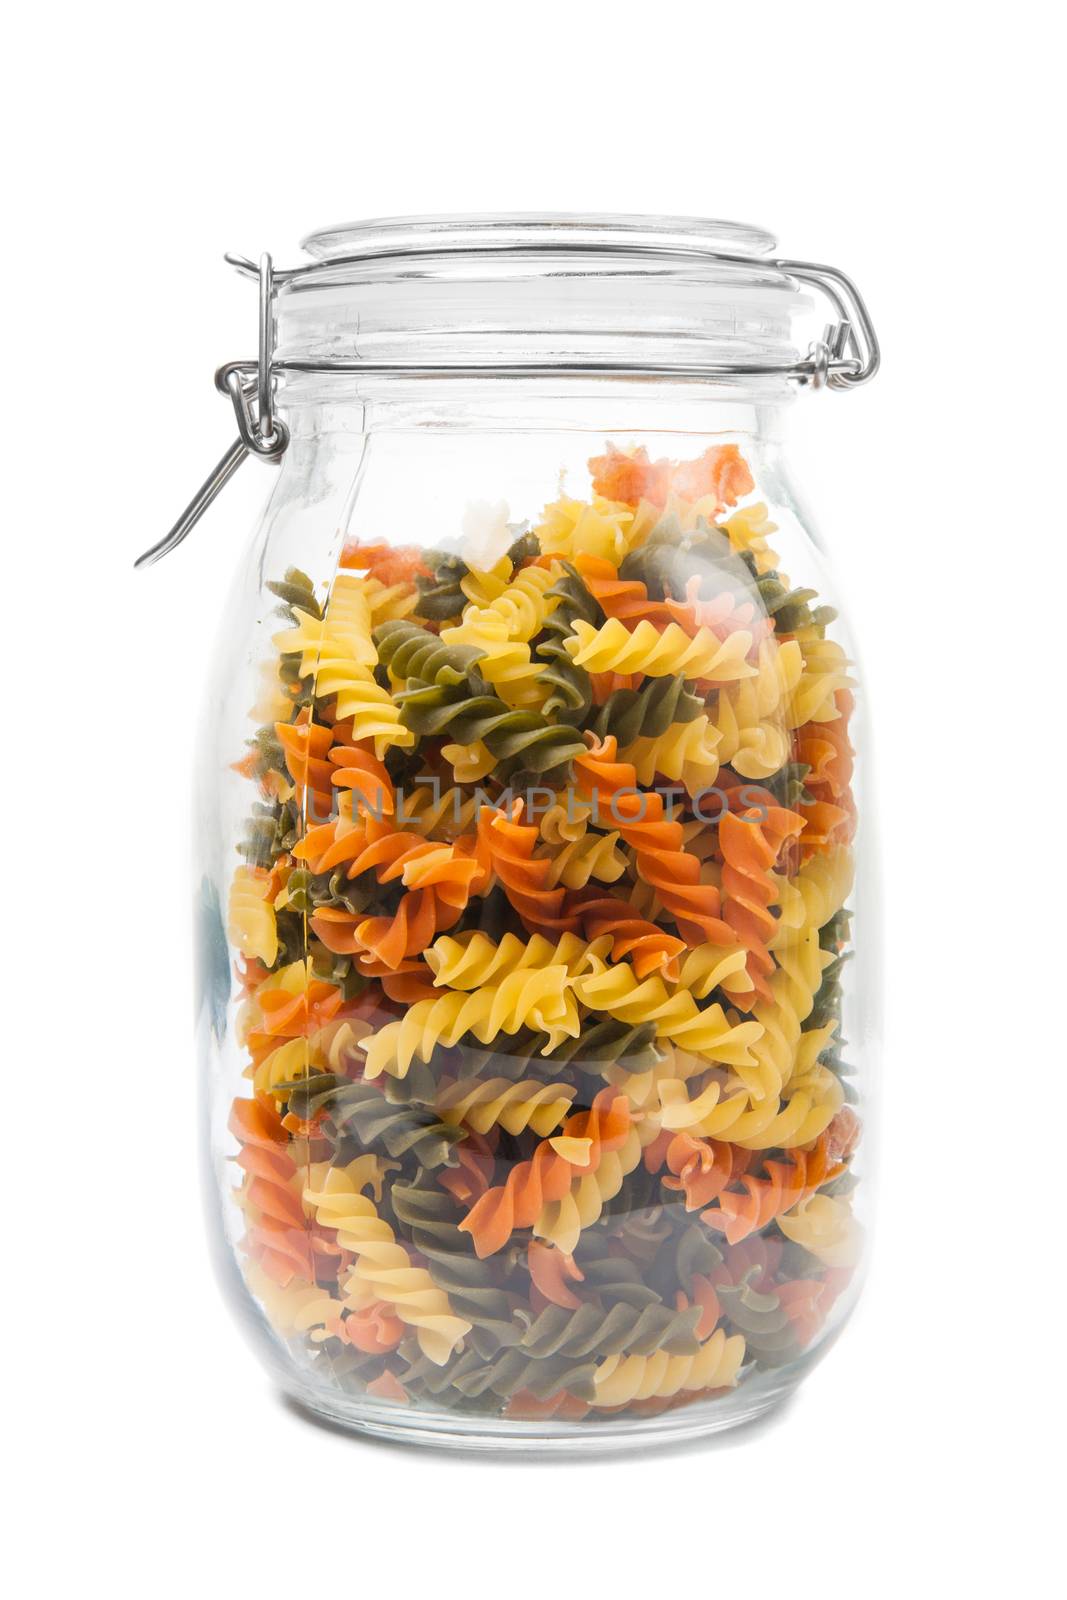 Pasta in a jar by TpaBMa